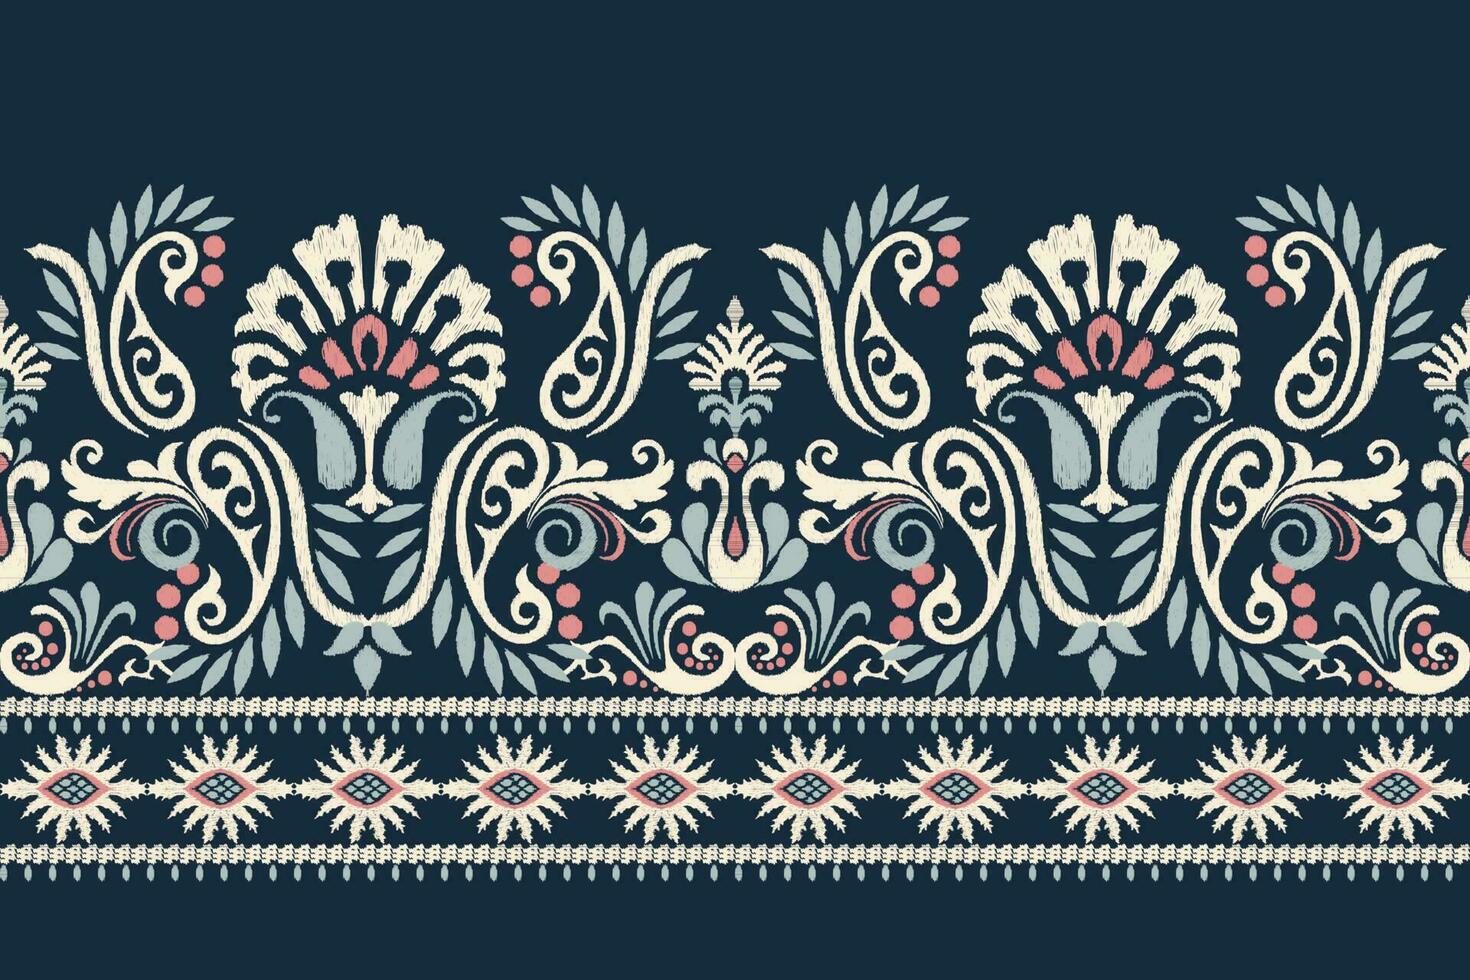 Ikat floral paisley embroidery on navy blue background.Ikat ethnic oriental pattern traditional.Aztec style abstract vector illustration.design for texture,fabric,clothing,wrapping,decoration,sarong.